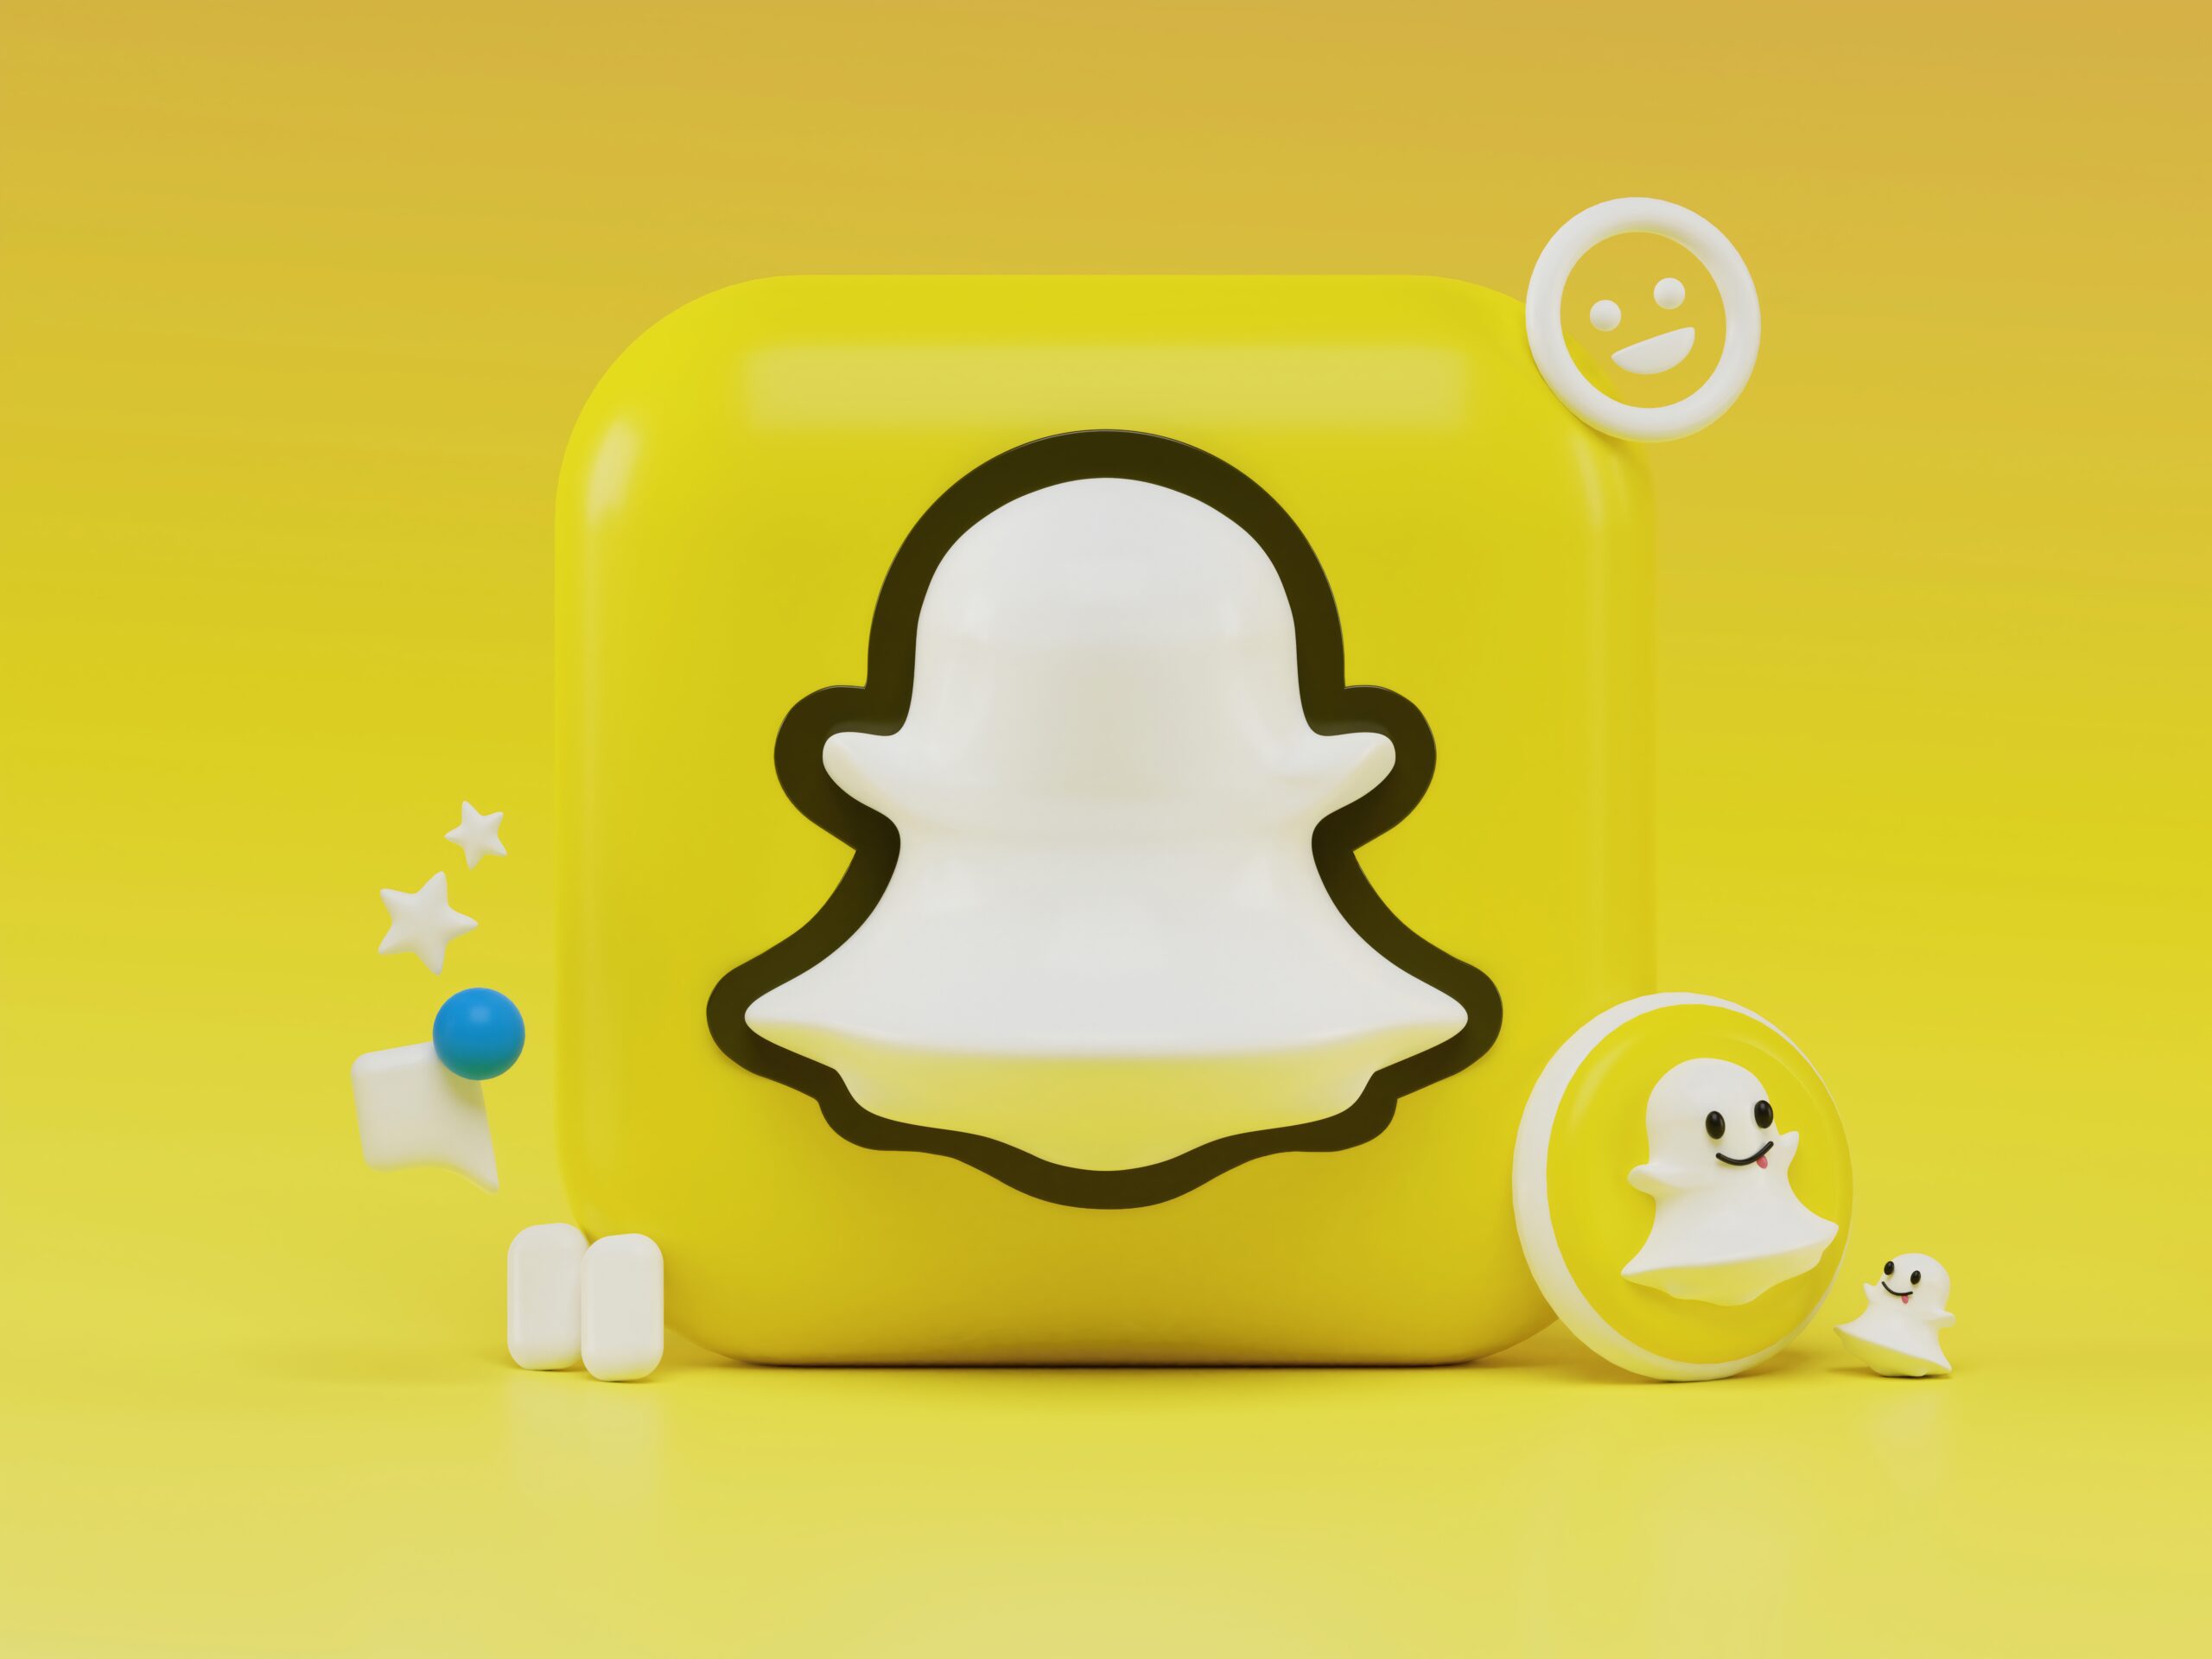 Does Snap score go up from chat?